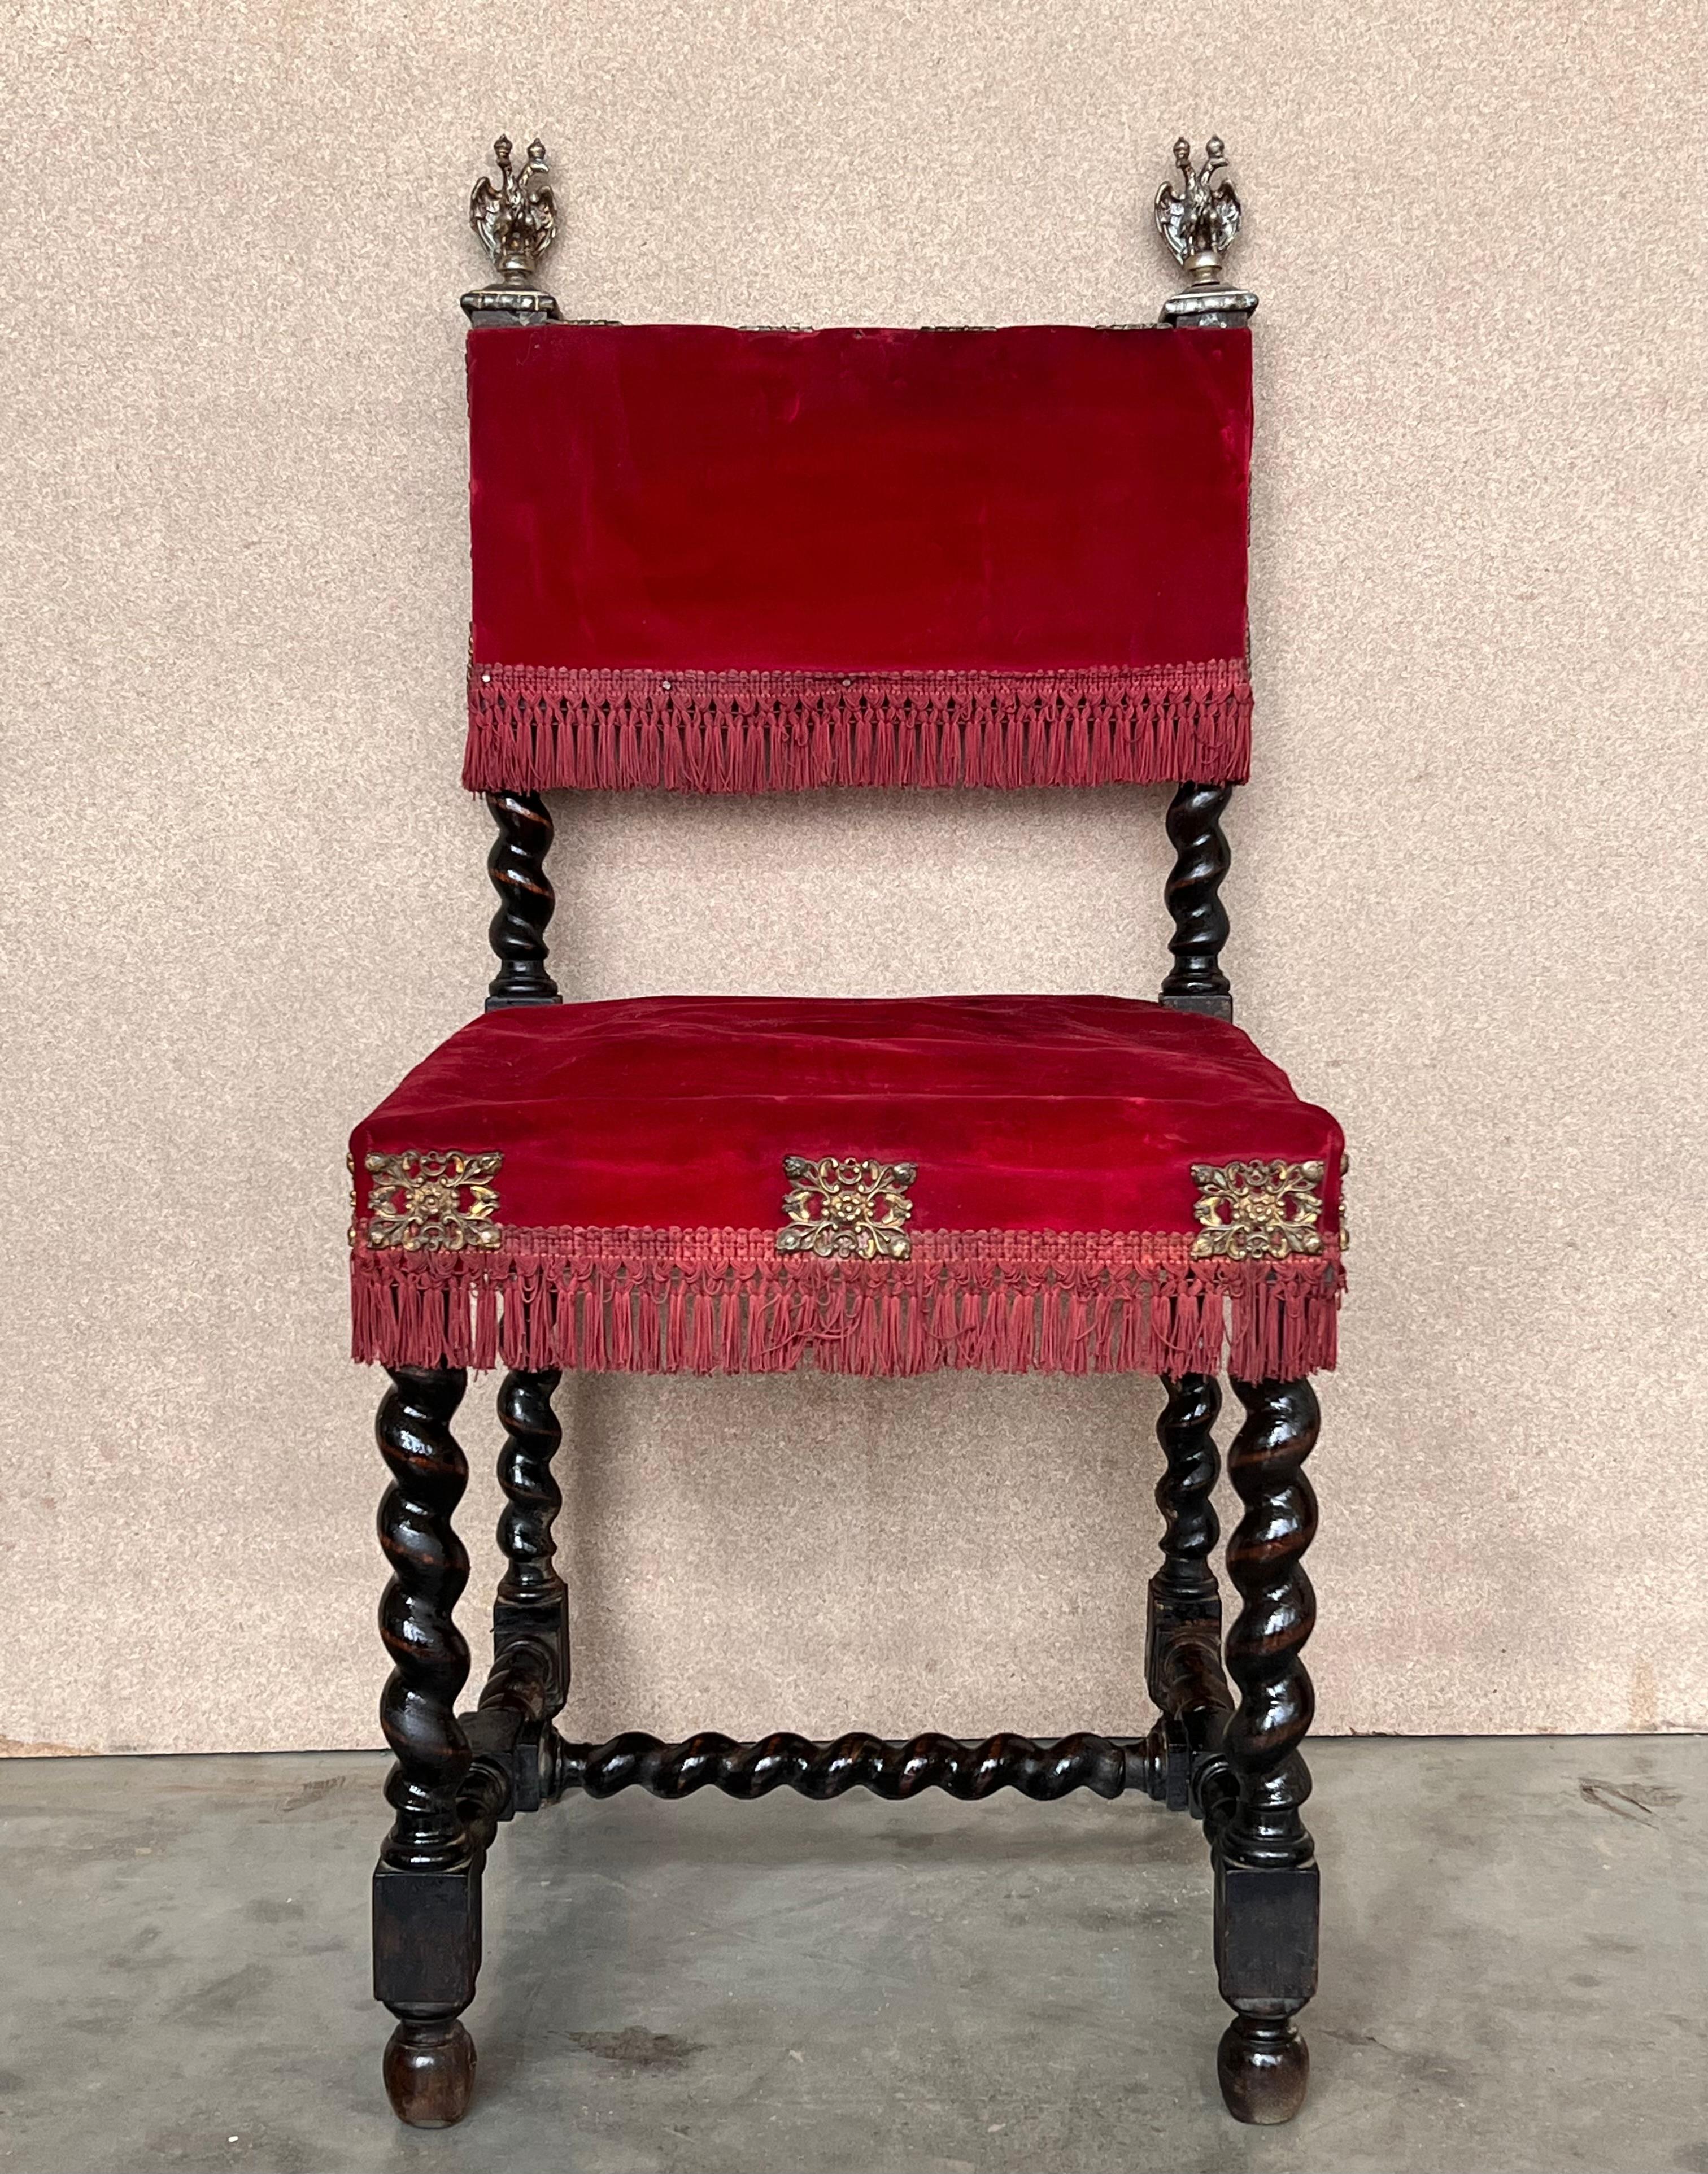 A set of 6 Spanish chairs with walnut structure, hand carved decoration and red velvet seat.
The pieces have a bronze details in the top.
These chairs are true to the Spanish character and each features carvings that employ typical Spanish